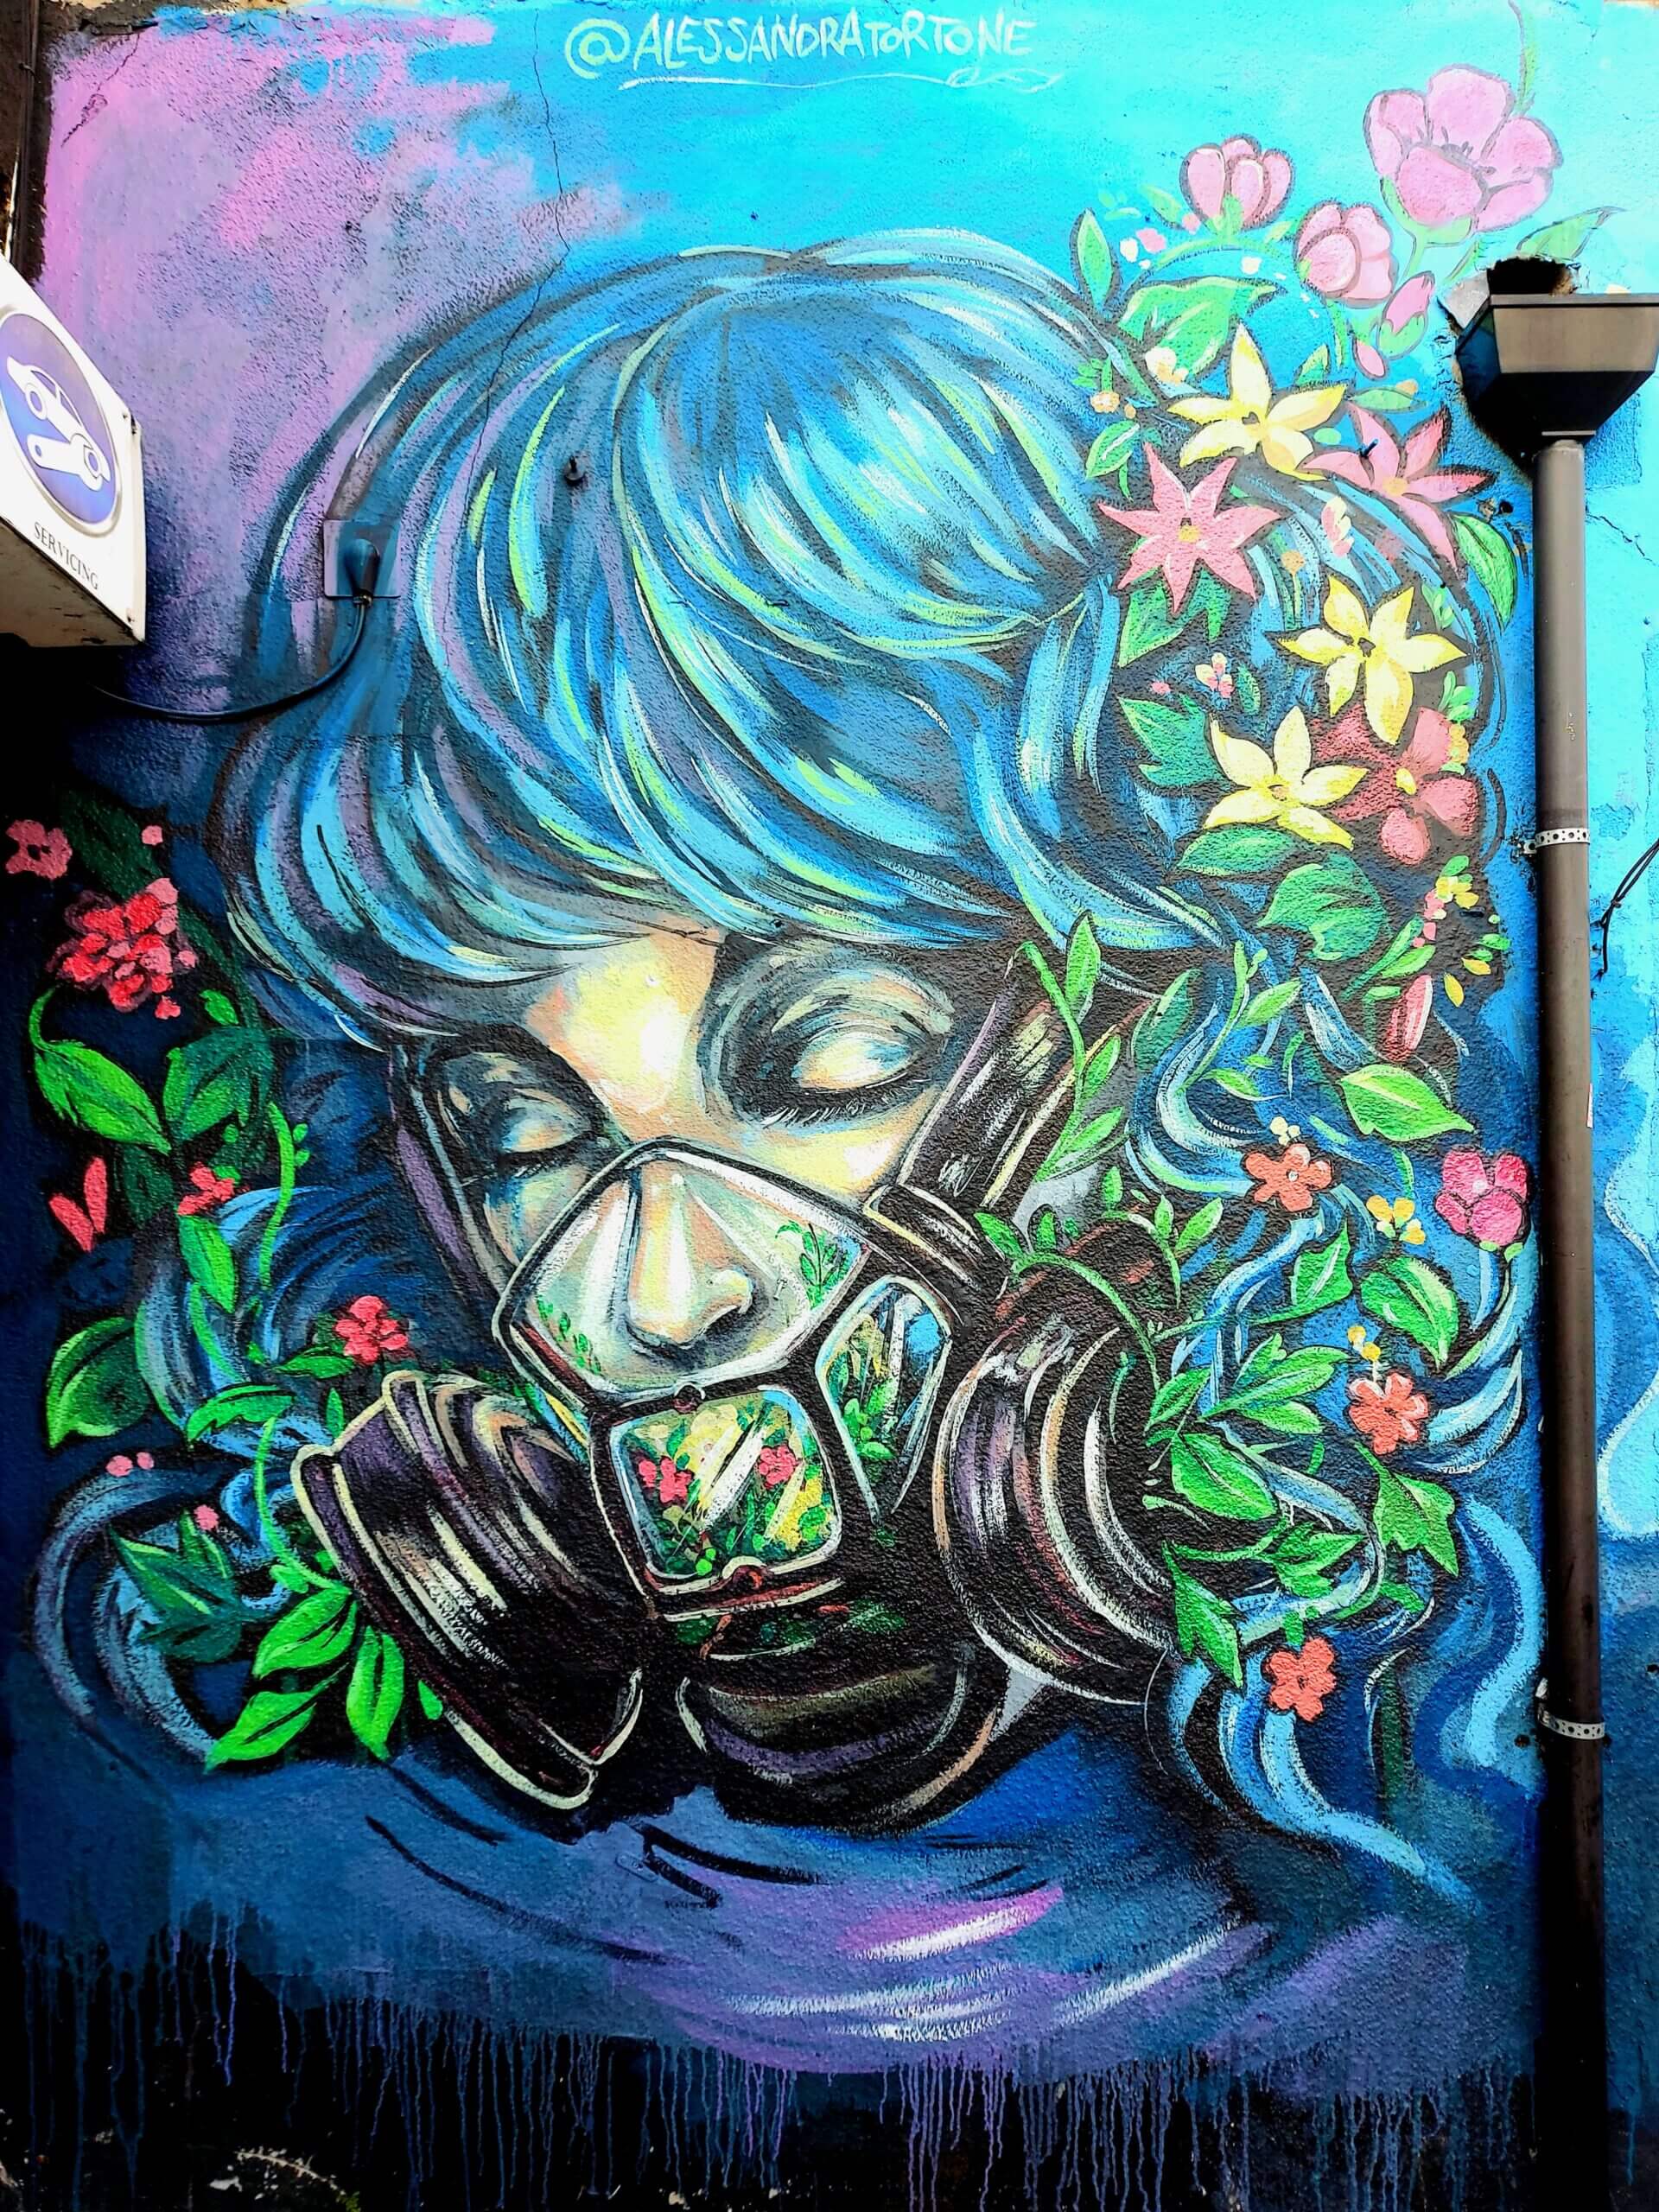 Street artwork of a female wearing a gas mask filled with flowers and exhaling flowers